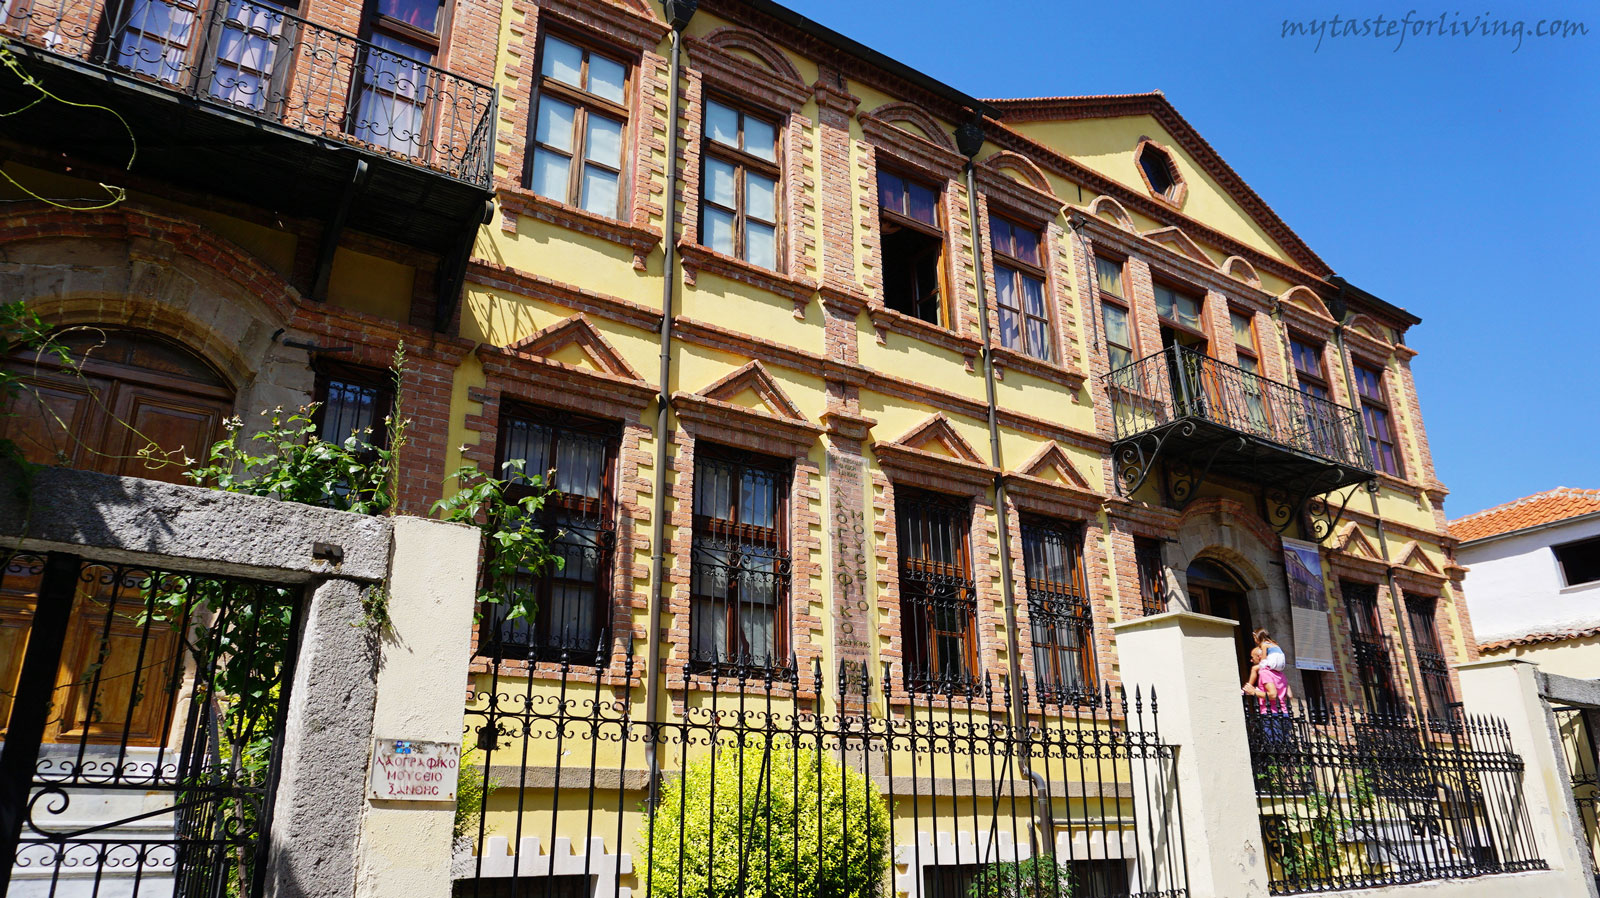 The "Folklore and historical museum" in Xanthi, Greece, is located in the picturesque, old part of the town. It belongs to the family of tobacco merchants of the family Kougioumtzoglou and is housed in two traditional buildings.